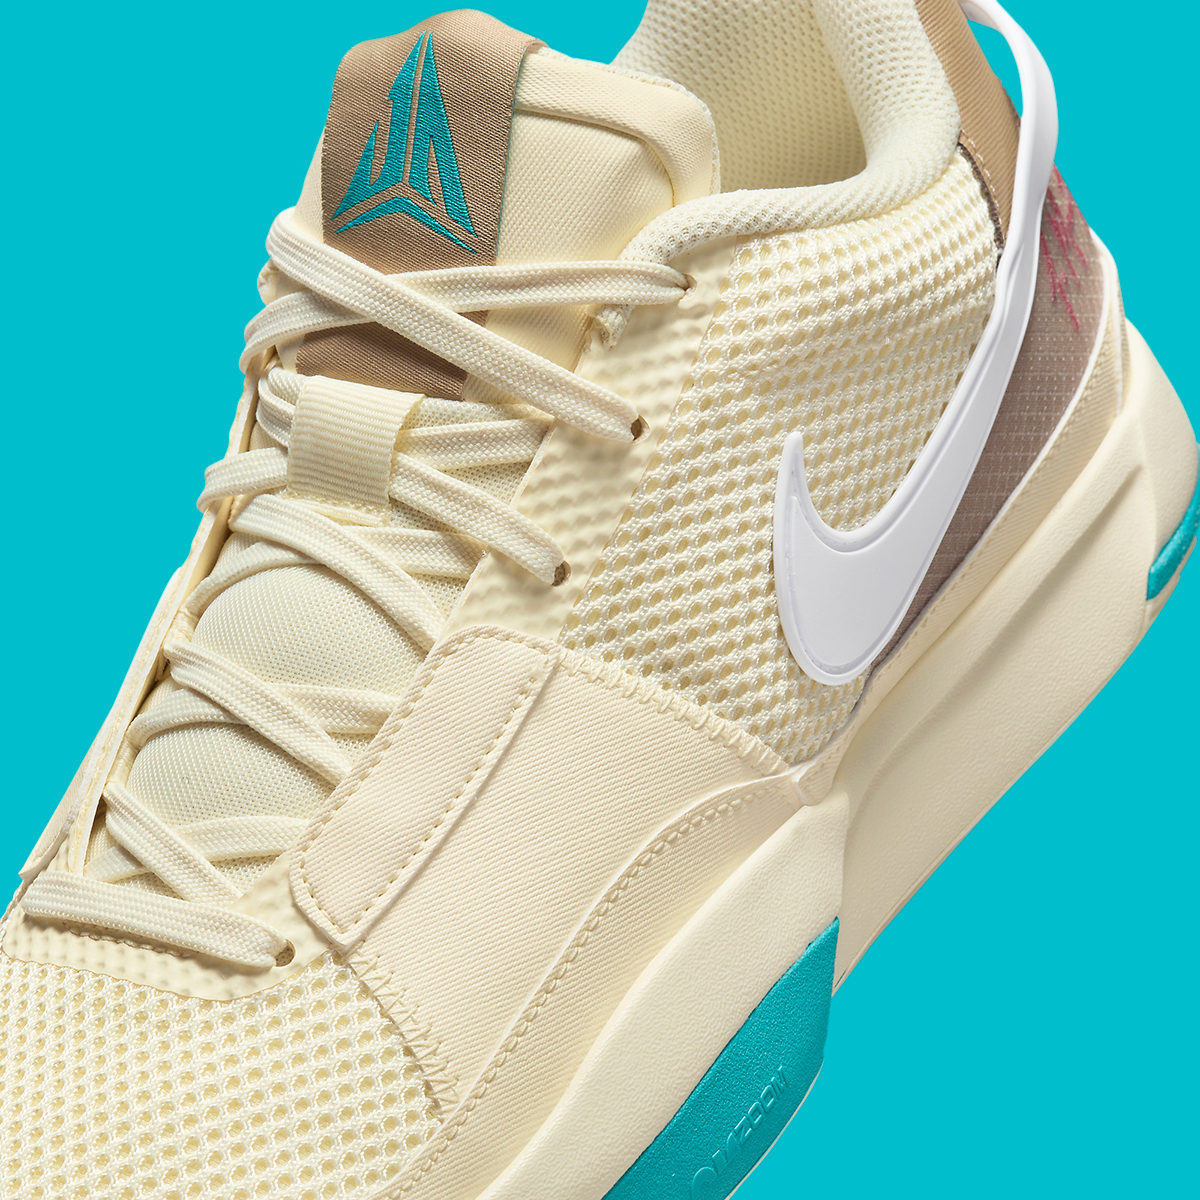 How Is The Nike Premium 'Obsidian' Now Only £75 Coconut Milk University Red Dusty Cactus Dr8786 102 4